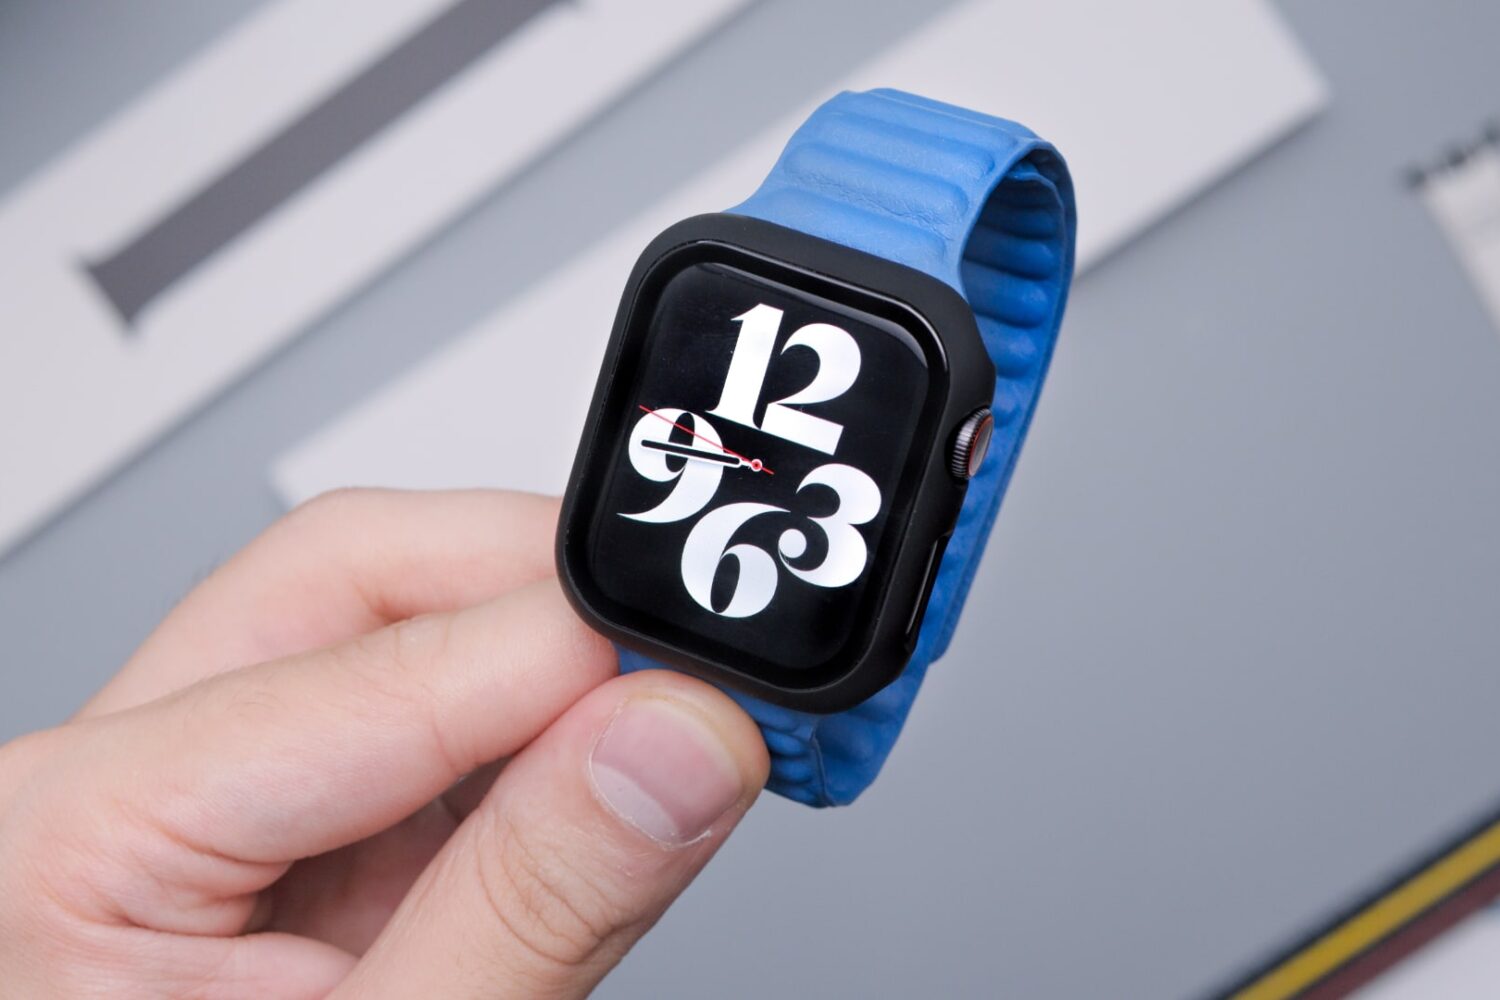 Apple Watch Series 7 with a blue band and case